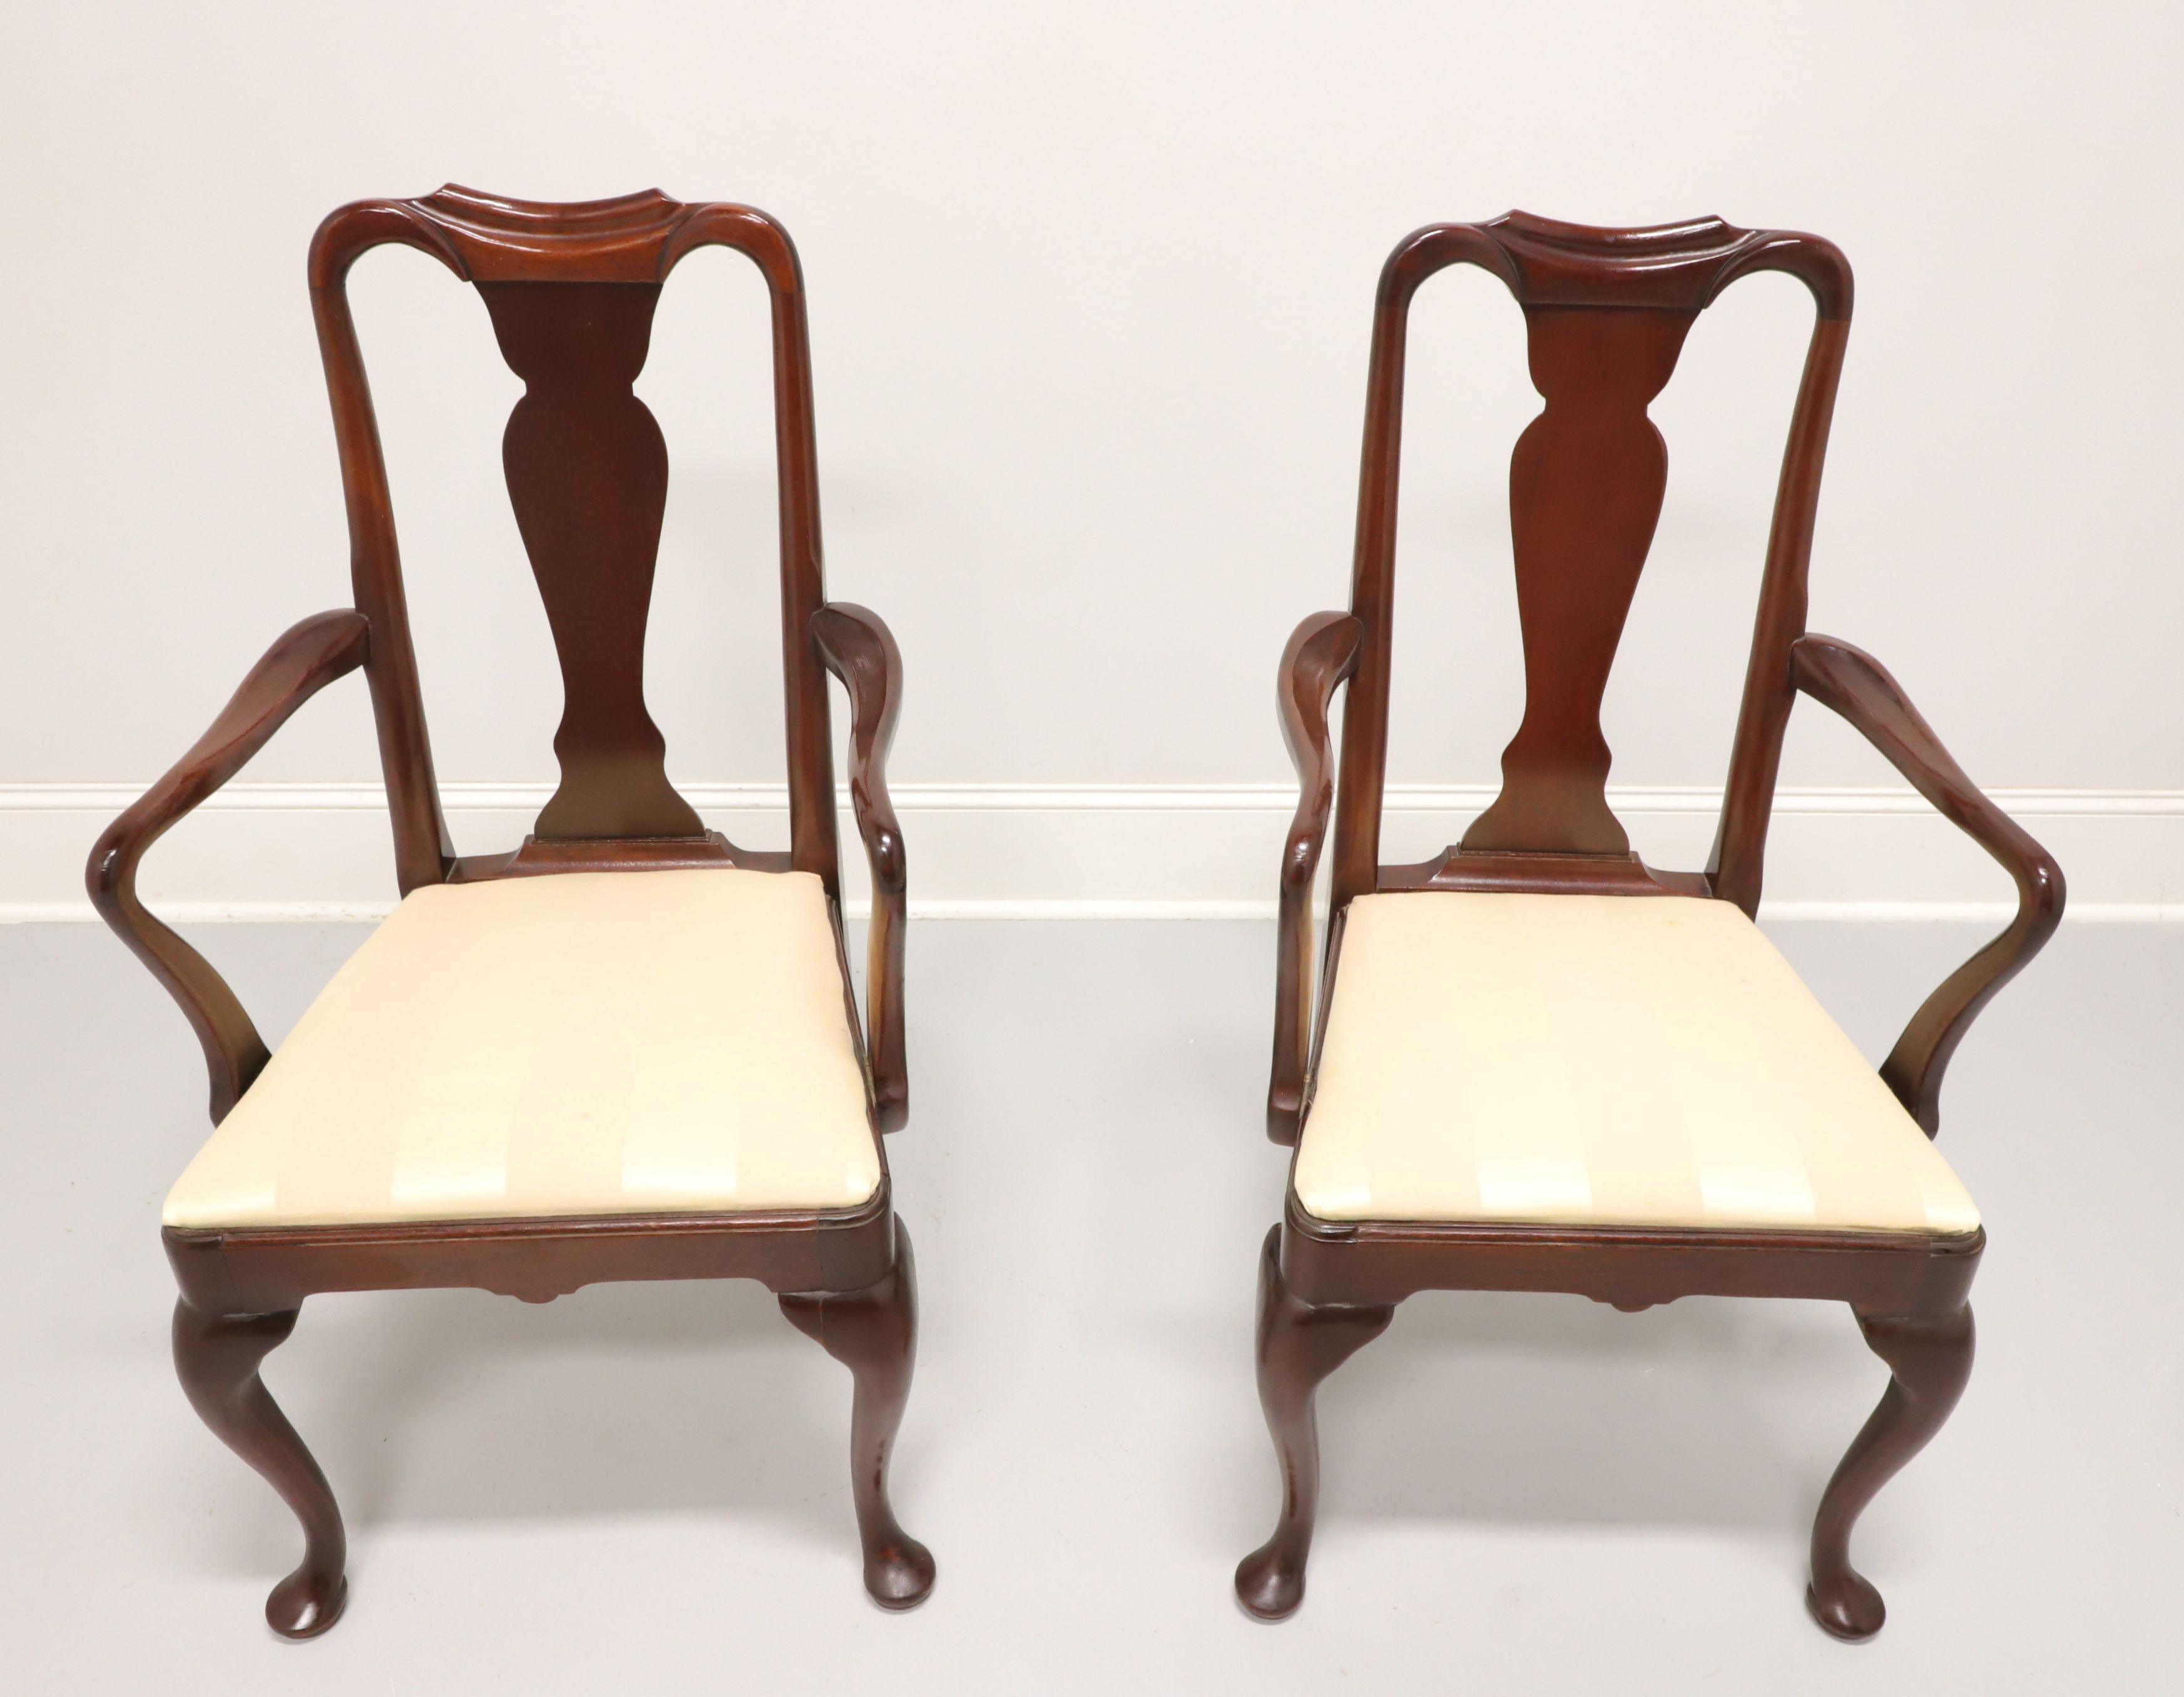 A pair of dining armchairs in the Queen Anne style by Hickory Chair. Solid mahogany with solid carved back, curved arms & supports, a yellow/gold color stripe fabric upholstered seat, cabriole legs and pad feet. Made in North Carolina, USA, in the